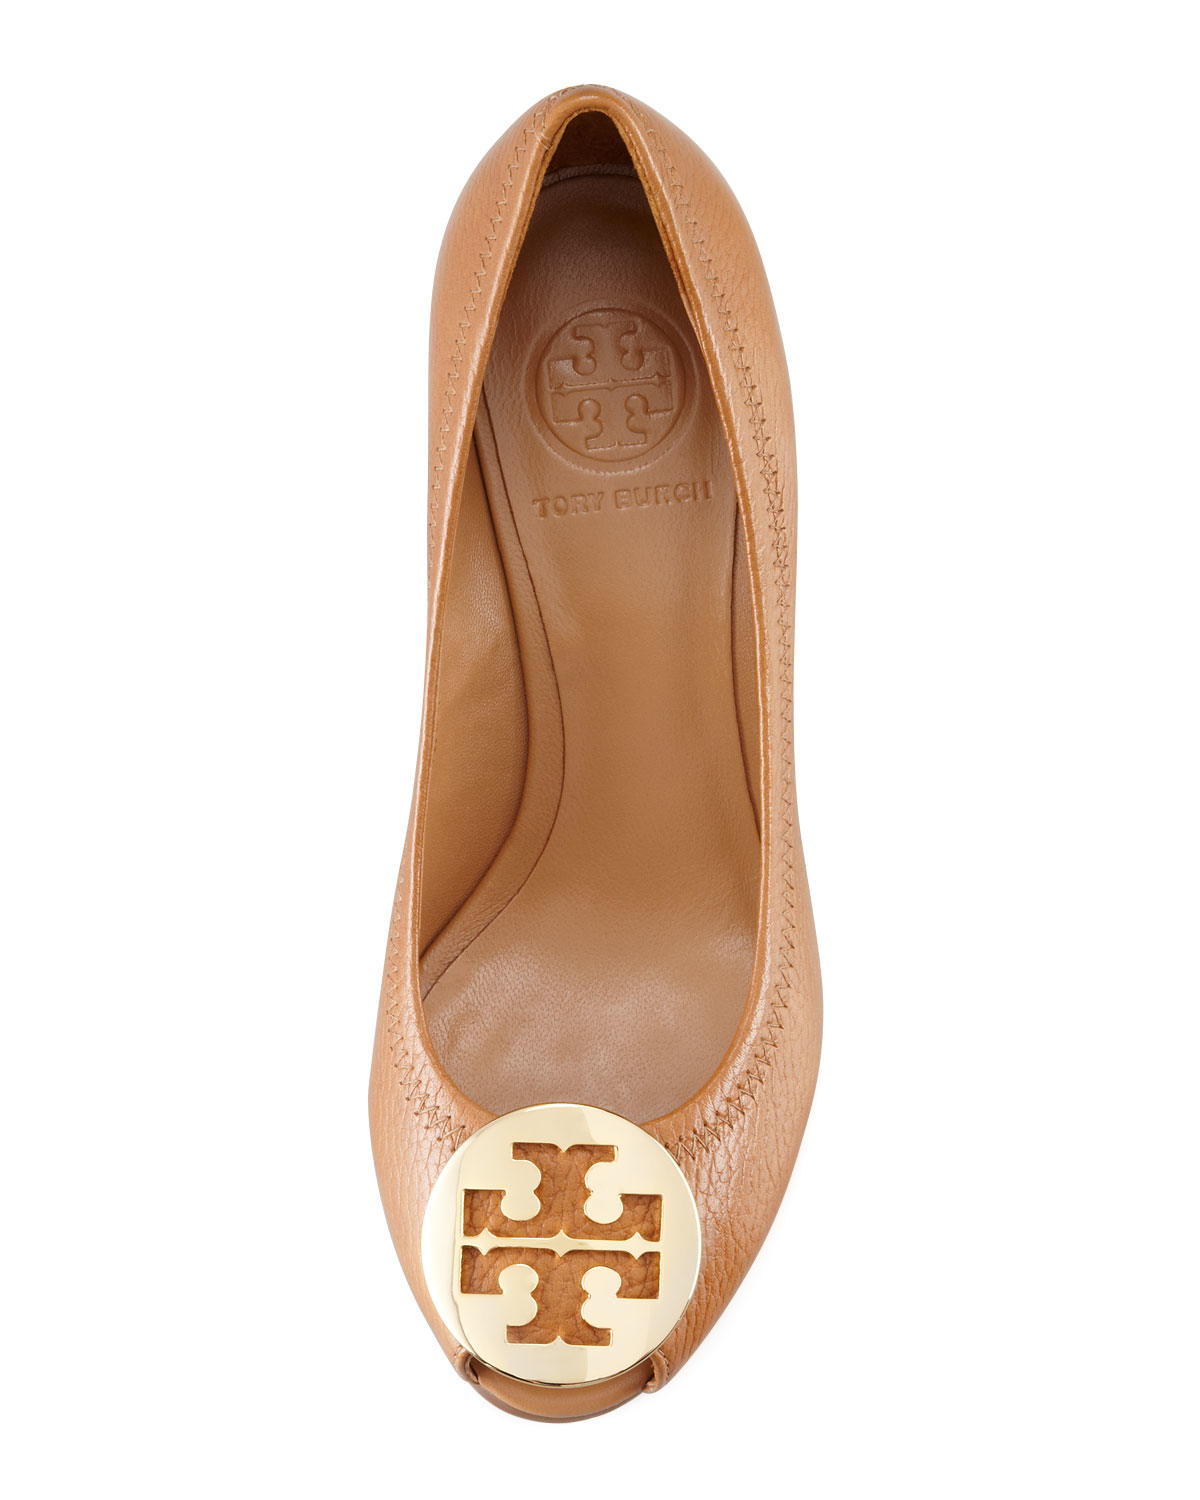 Tory Burch Sally 2 Leather Wedge Pump in Brown - Lyst